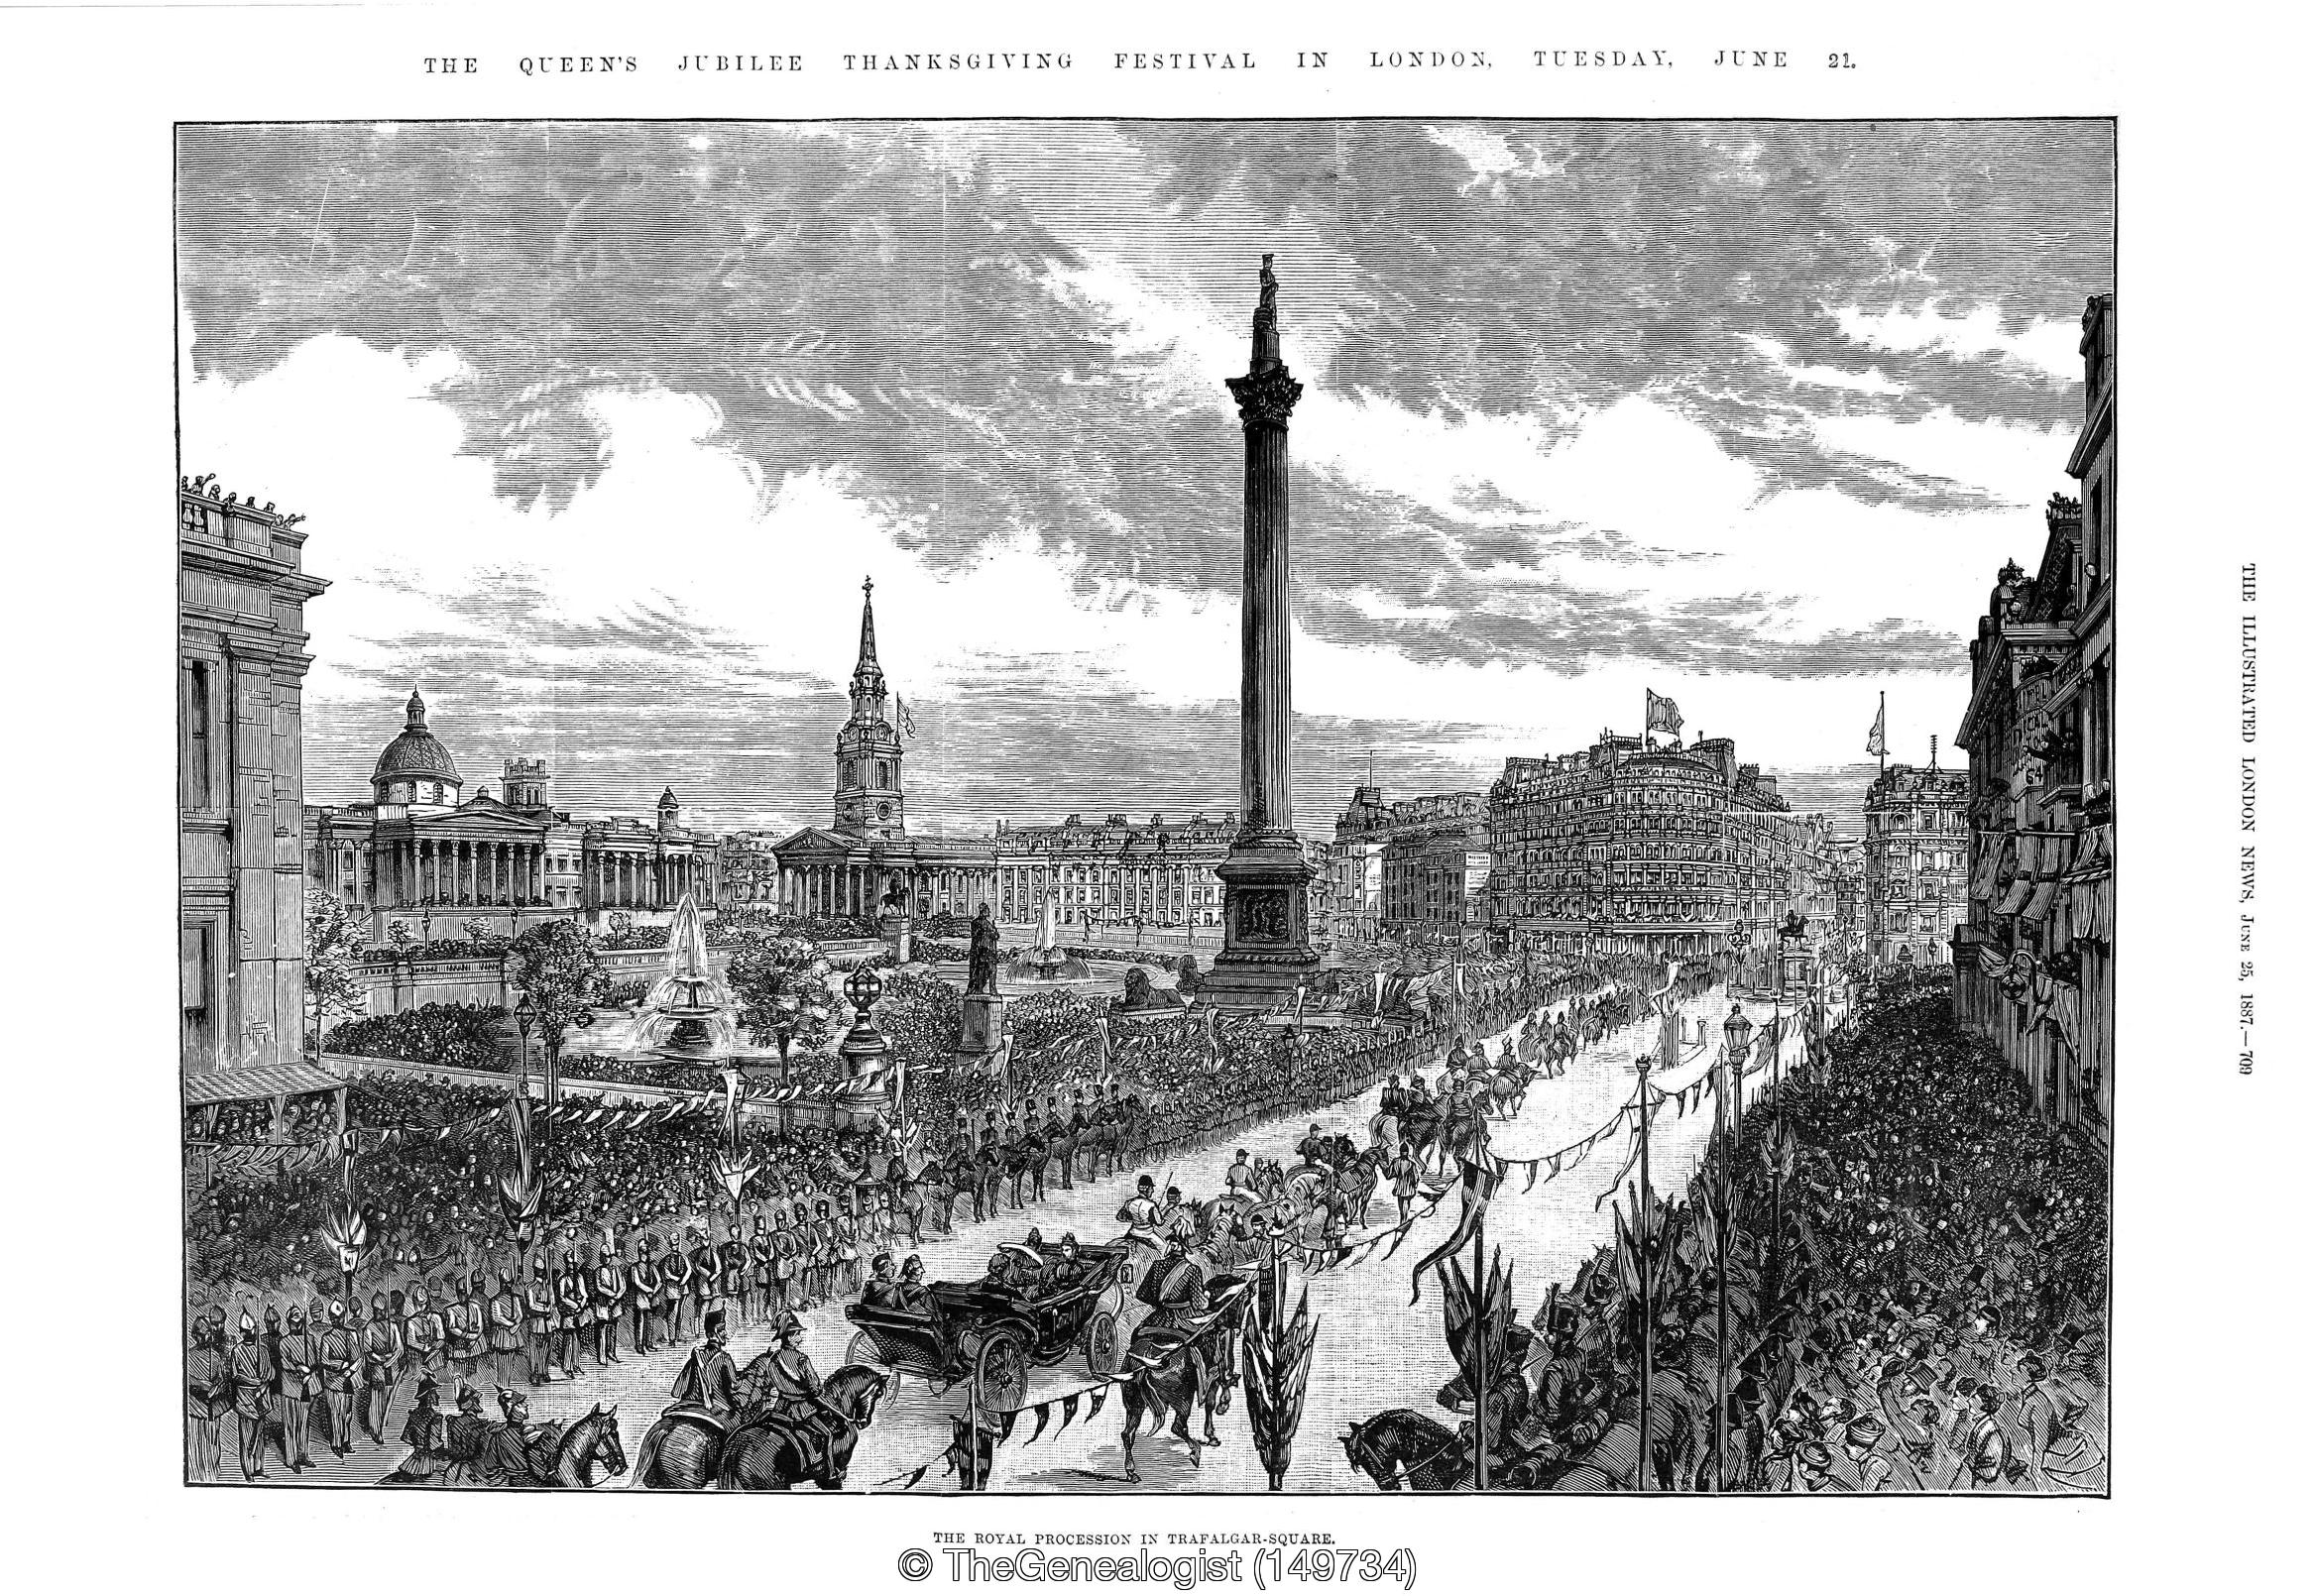 Queen Victoria's Jubilee Thanksgiving Festival as reported by The Illustrated London News June 1887 from
		TheGenealogist's Newspapers & Magazine Collection